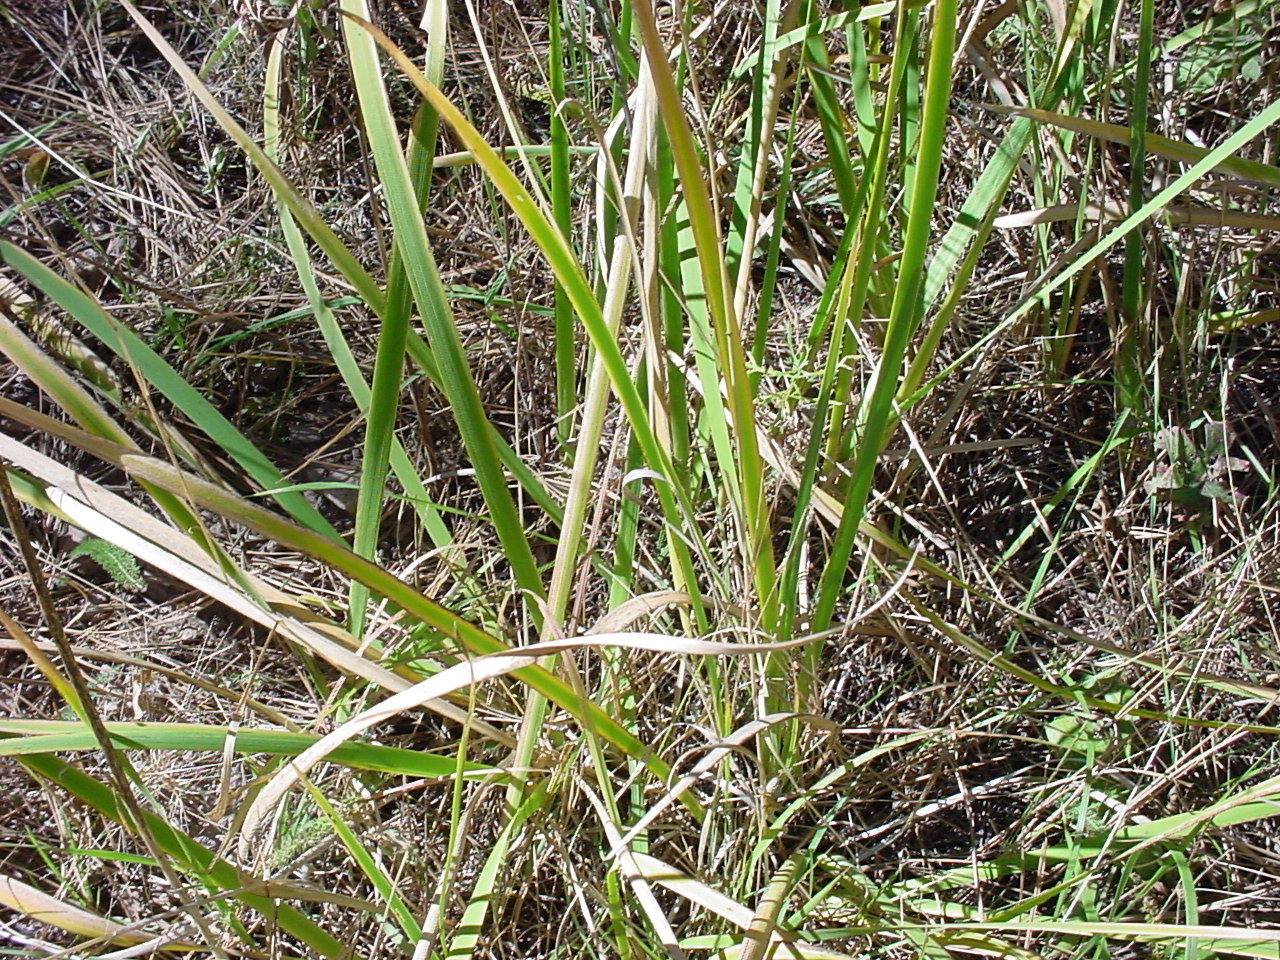 Growth habit showing formation of leaves